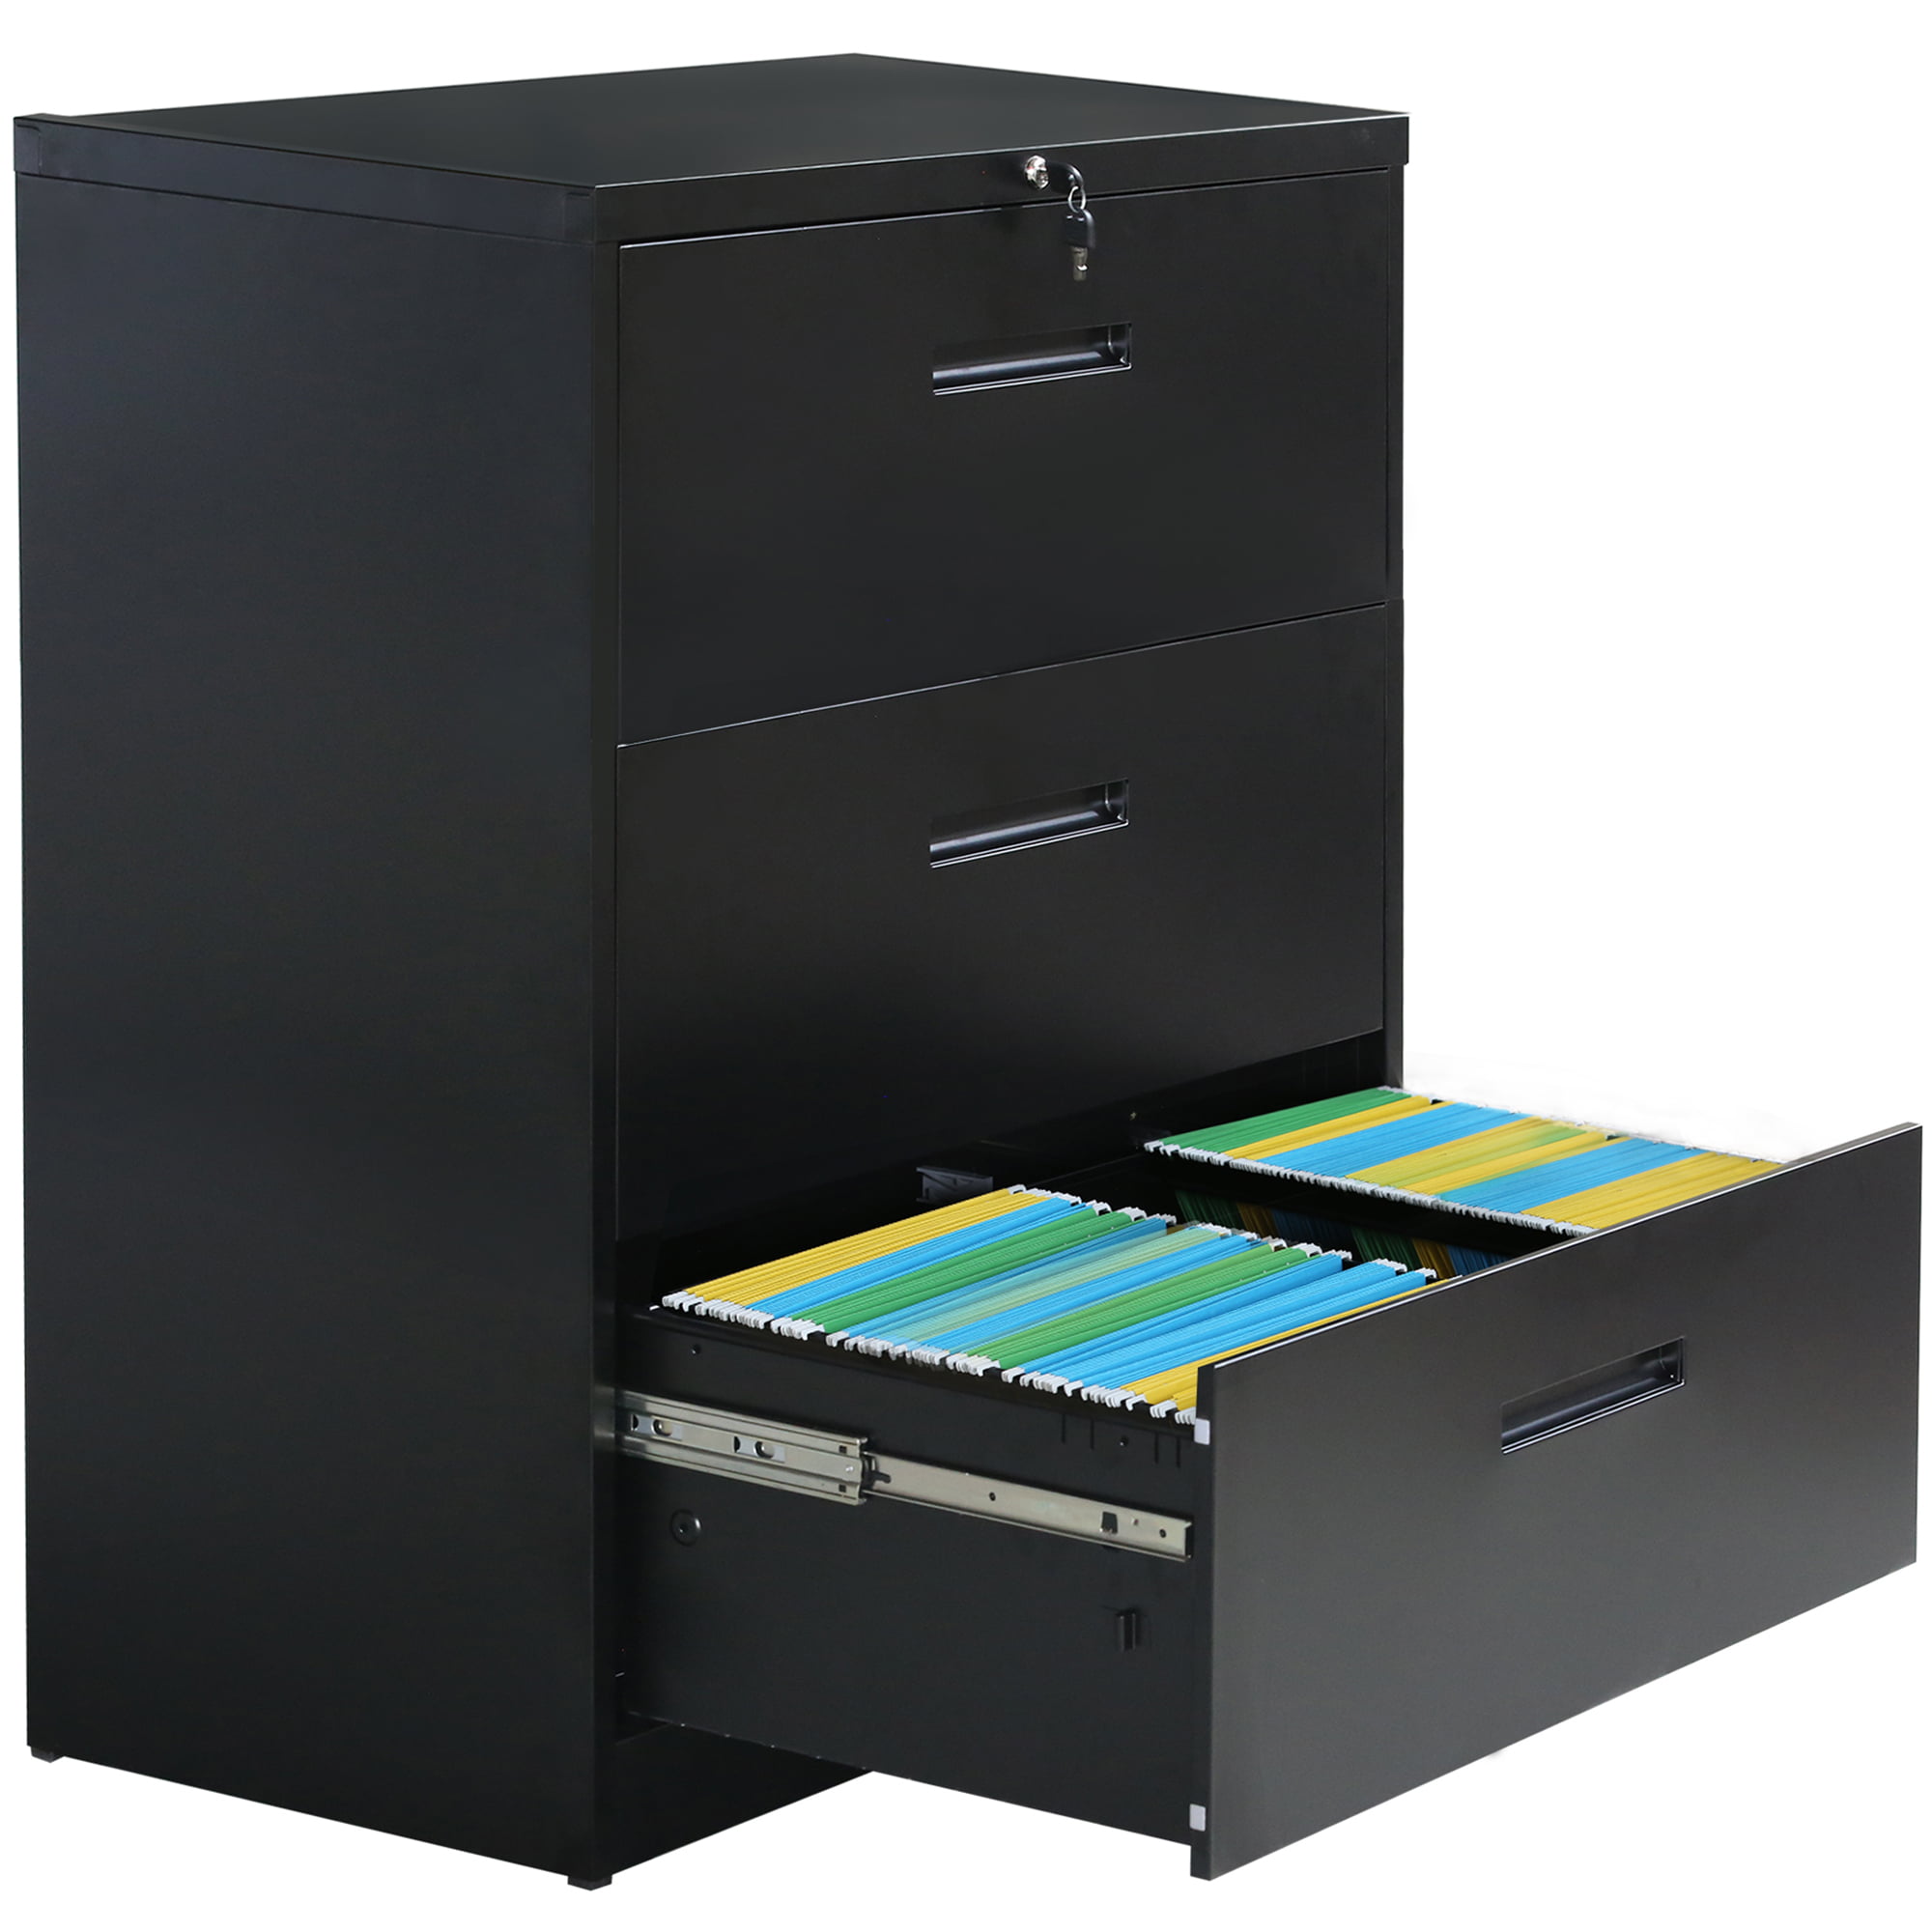 Locking Storage Cabinet With 3 Drawers, Locking Filing Cabinets For Home